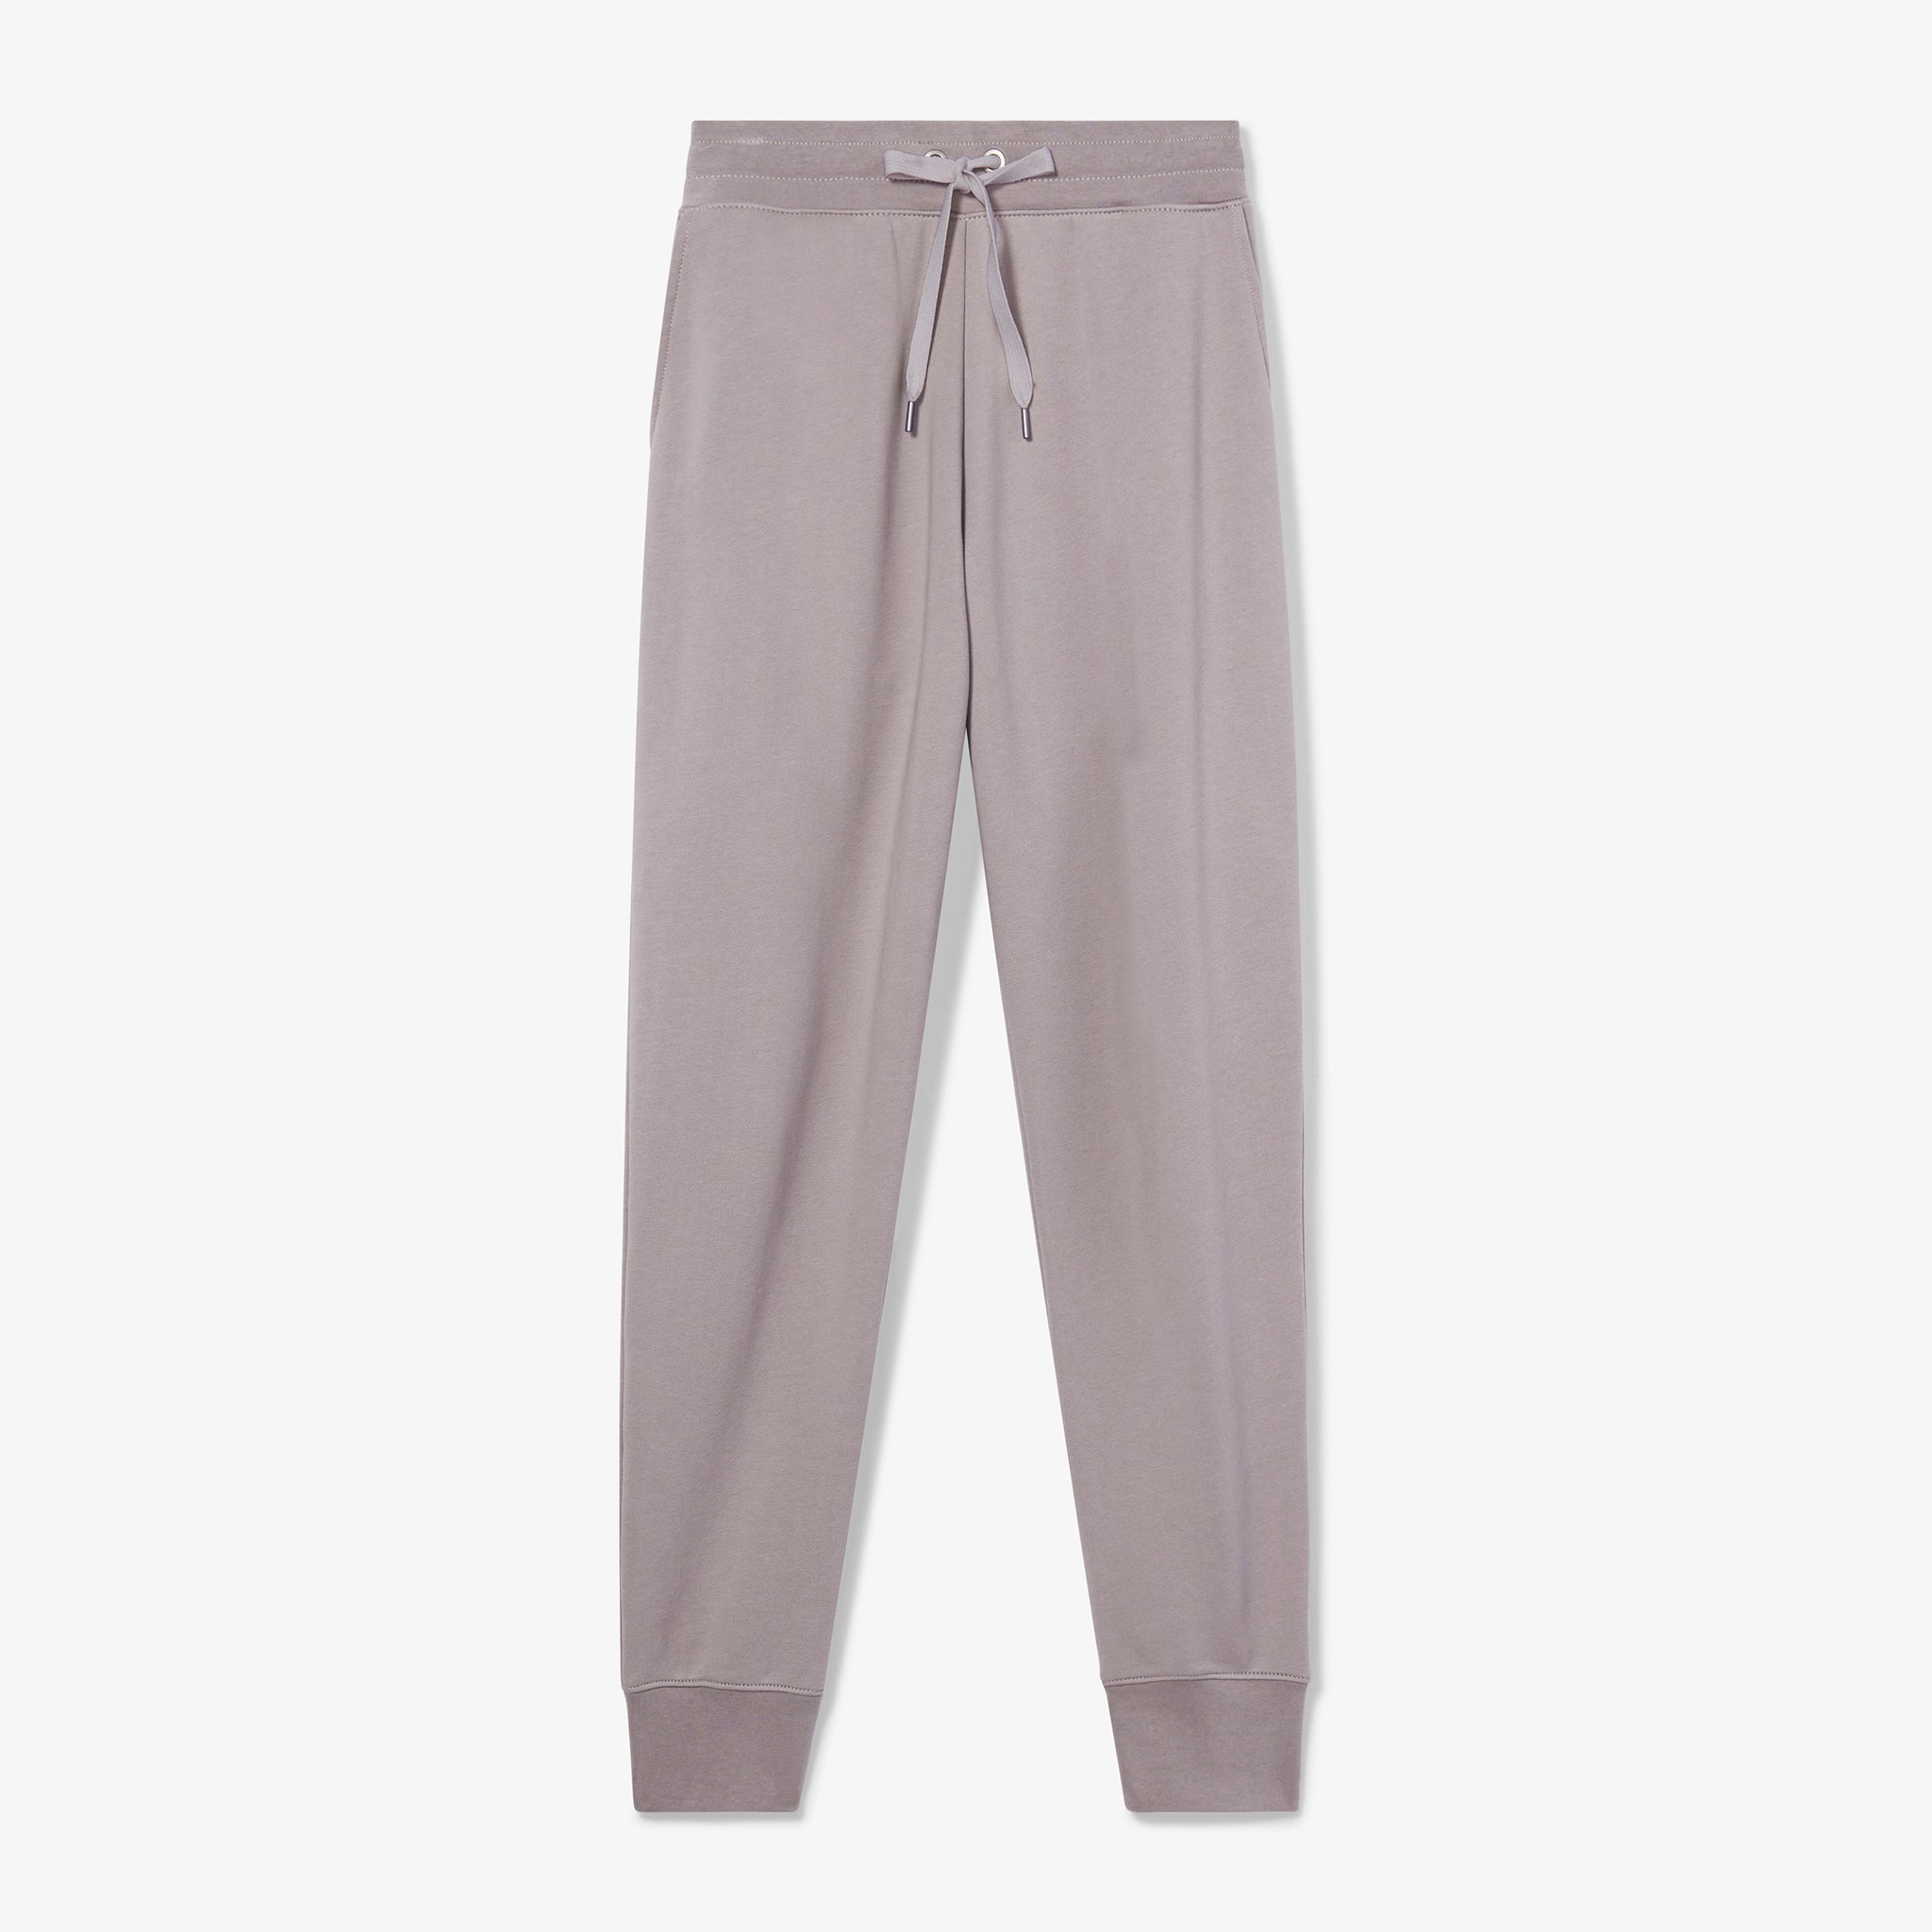 Packshot image of the Joni Jogger - French Terry in Wisteria